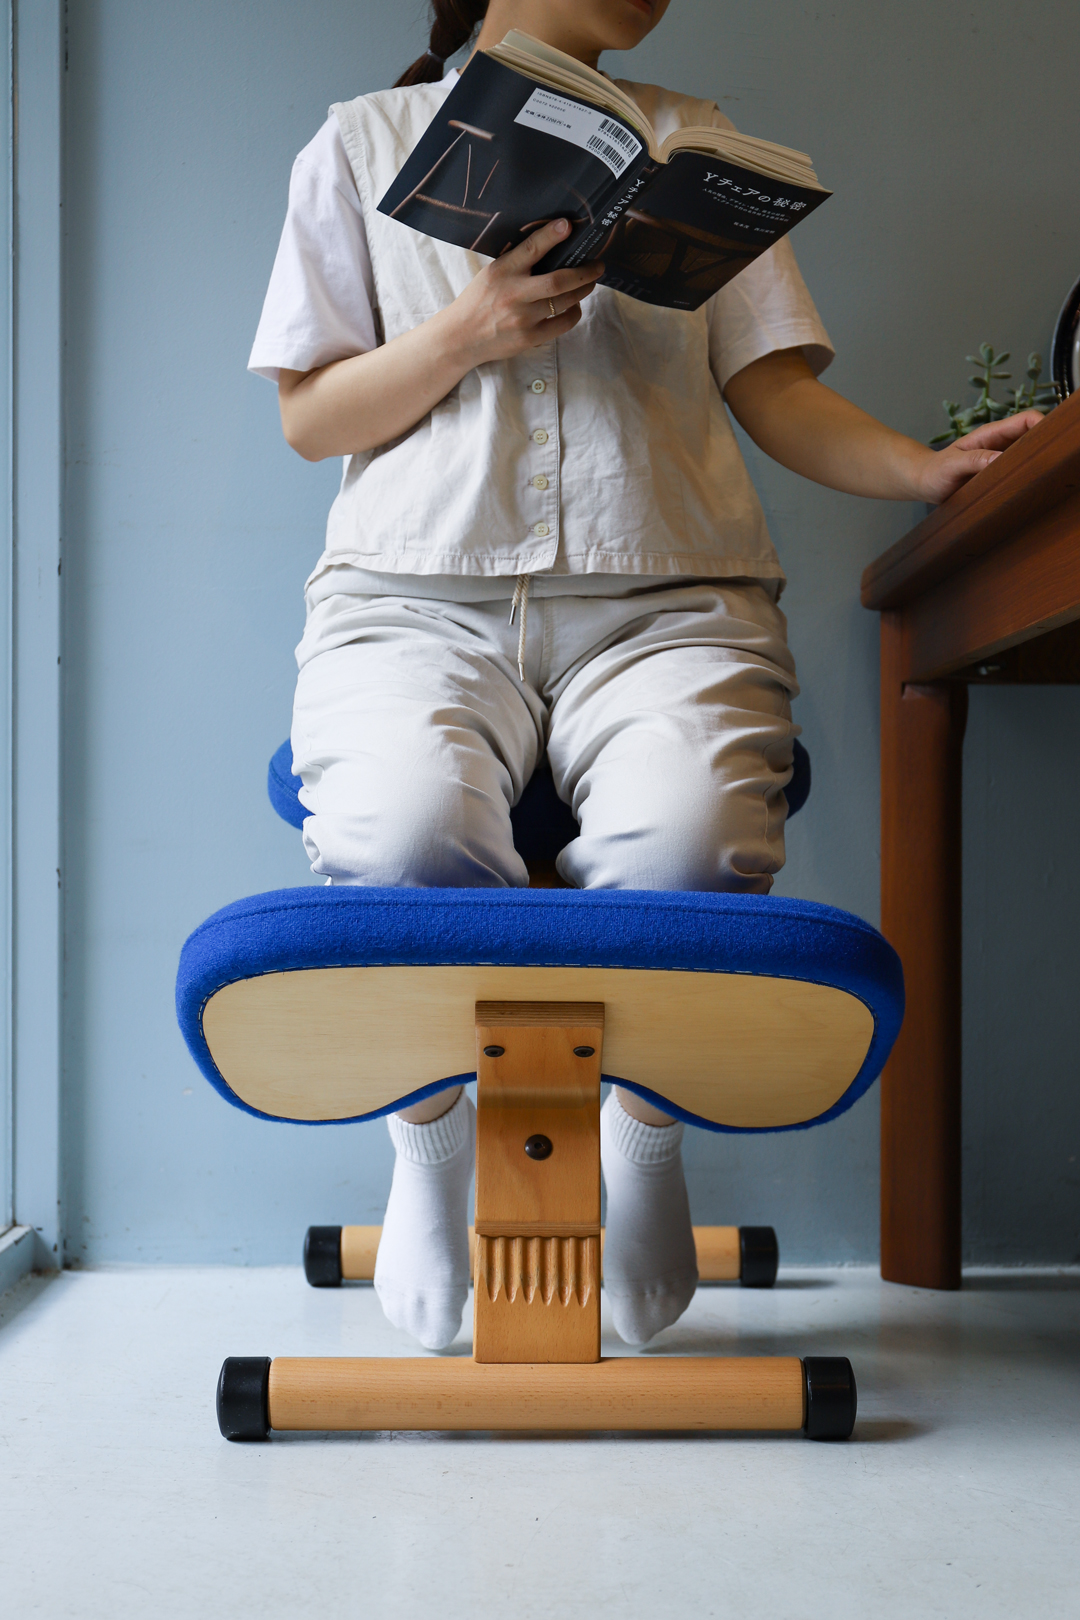 Rybo Balance Easy Chair Norway/リボ バランスチェア イージー ブルー ノルウェー デザイン 椅子 北欧家具